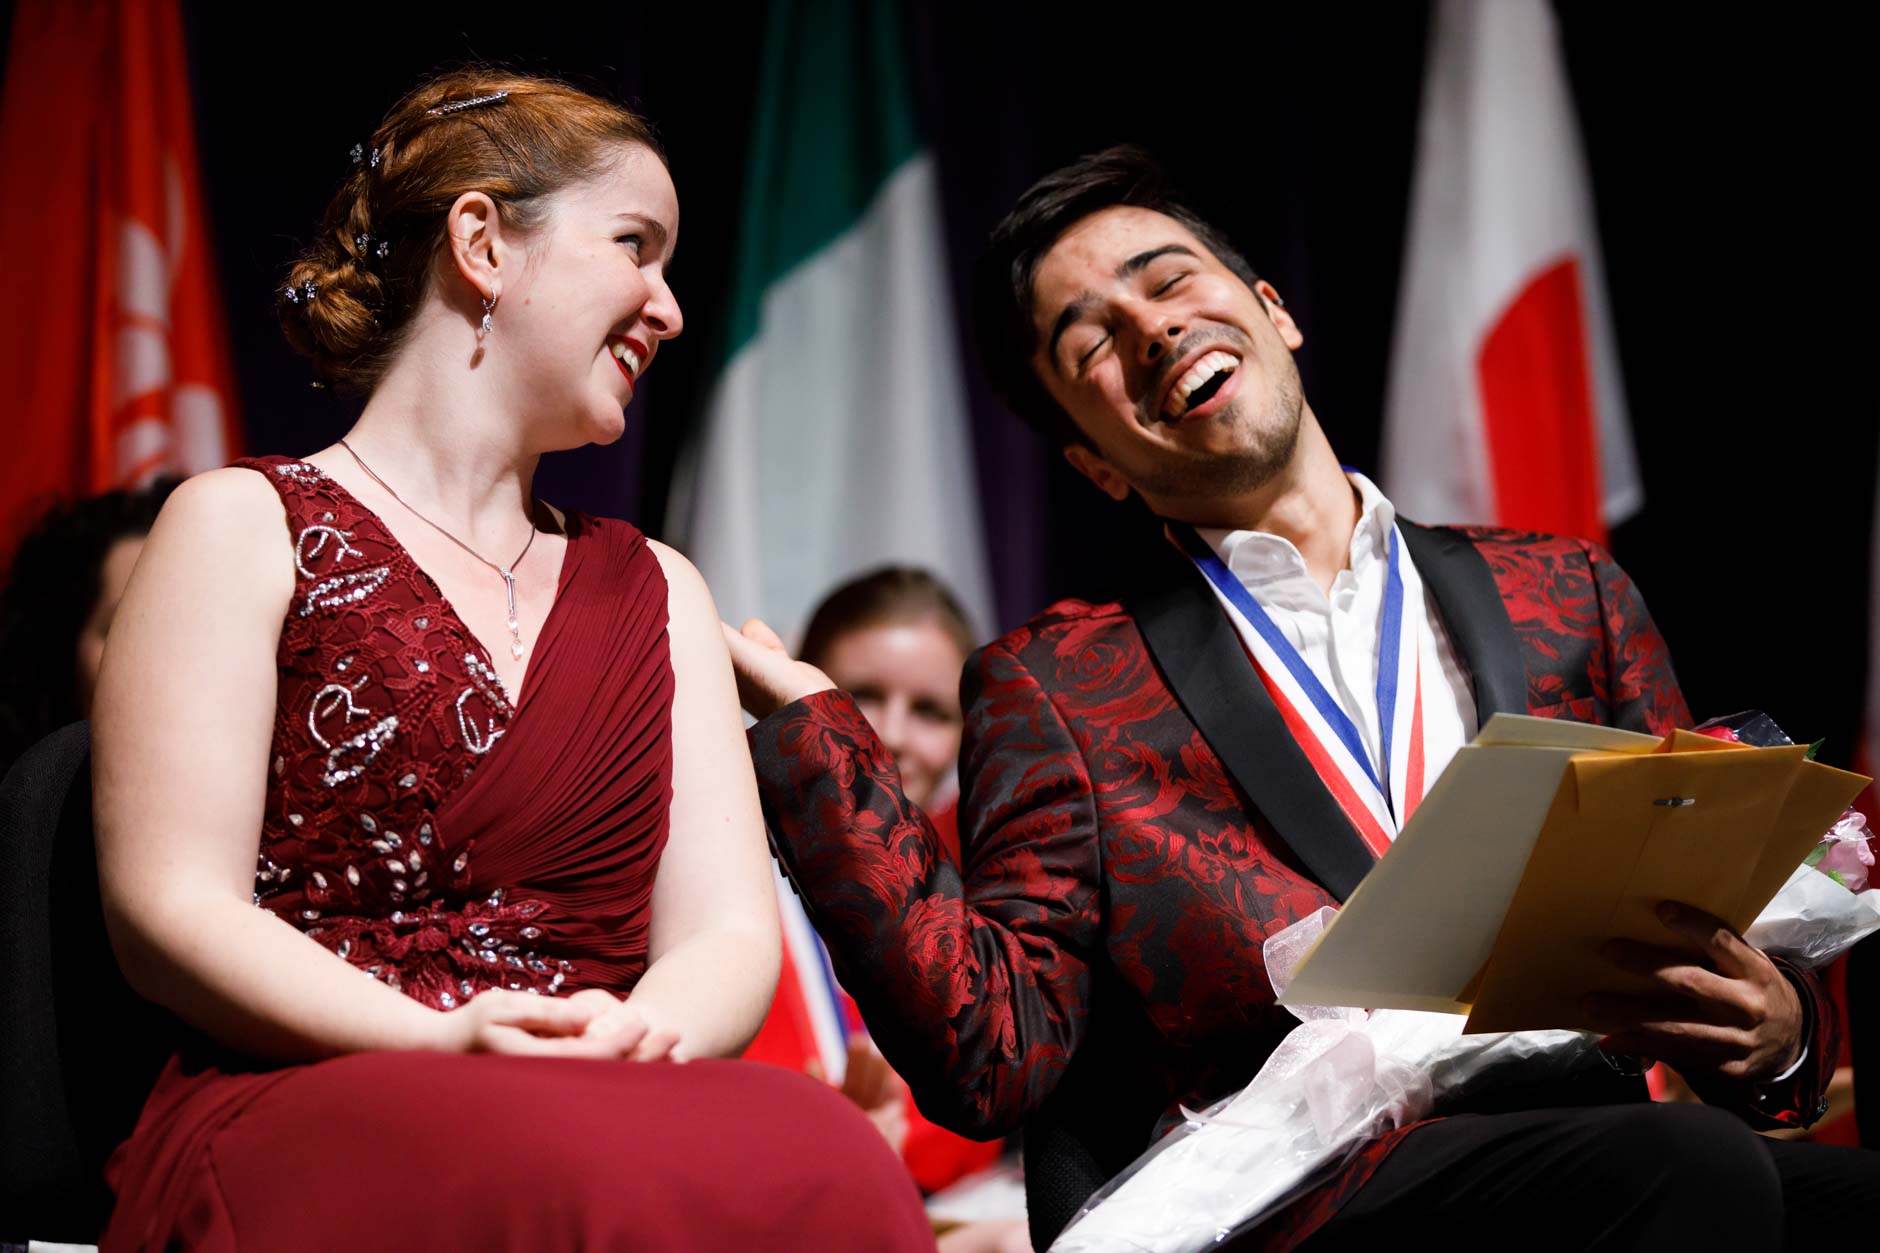 First prize winner Melanie Laurent from France, left, is congratulated by second prize winner Valerio Lisci from Italy during the awards ceremony of the 11th USA International Harp Competition at Indiana University in Bloomington, Indiana on Saturday, July 13, 2019. (Photo by James Brosher)